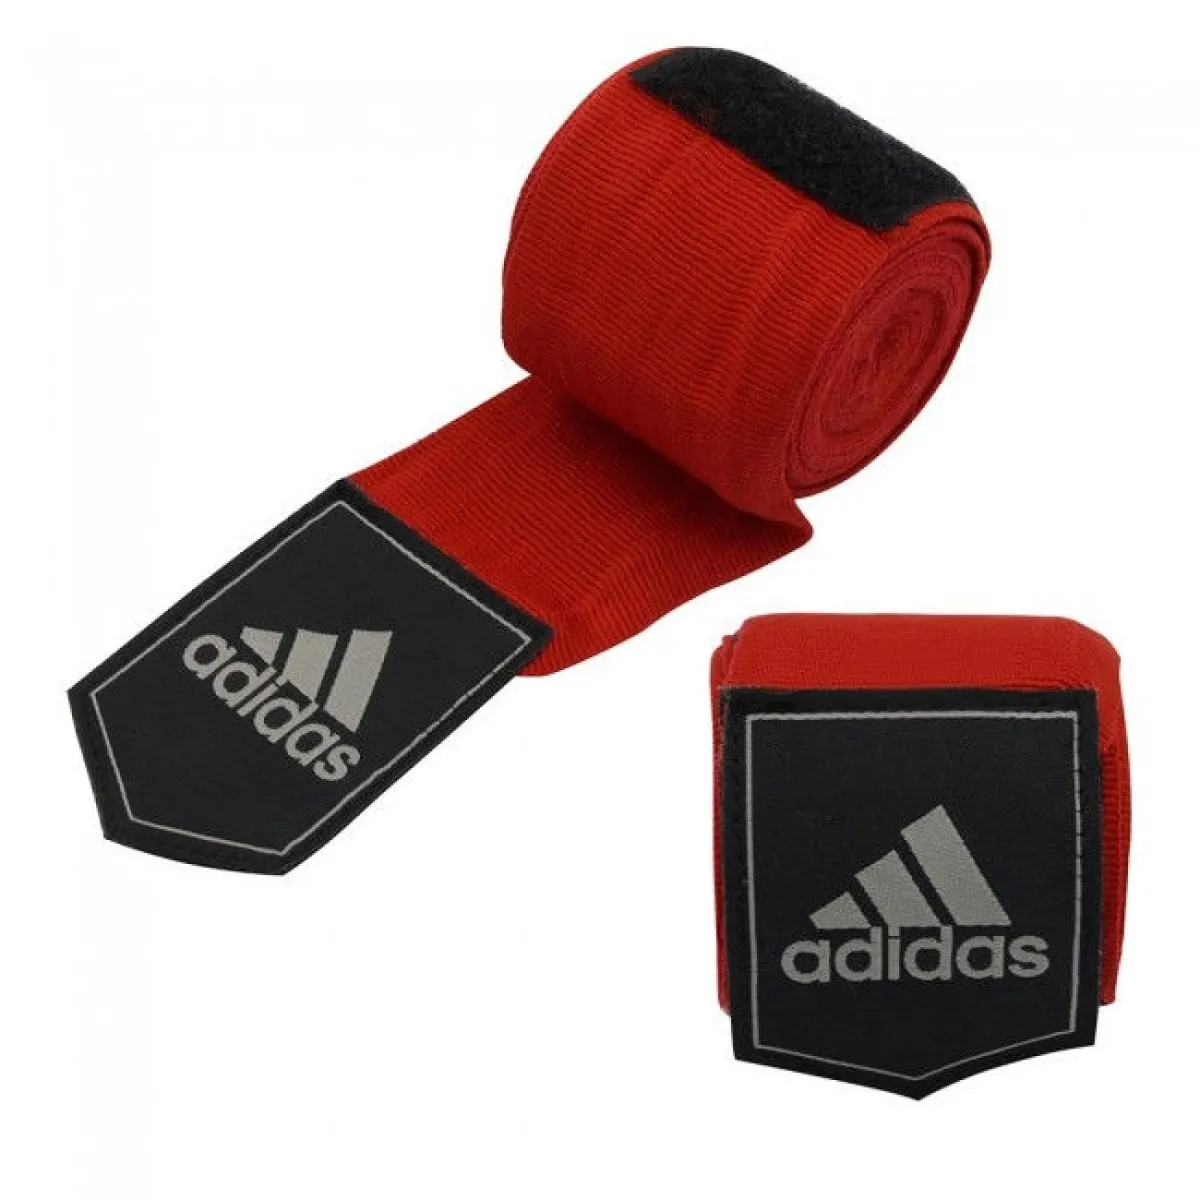 adidas boxing bandages red 2.55 m, 3.5 m, 4.5 m